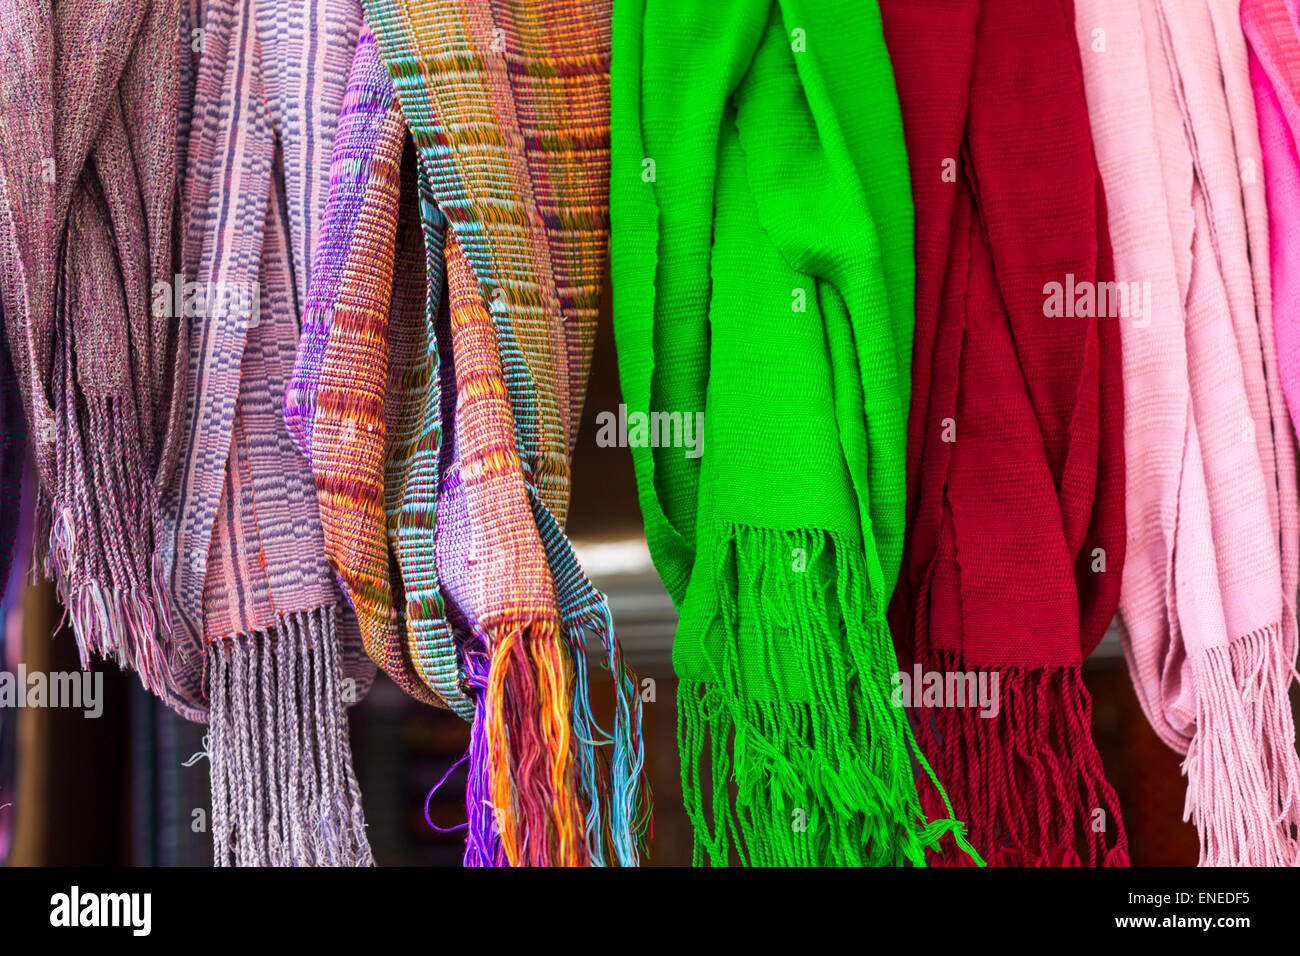 Handwoven Scarves High Resolution Stock Photography and Images - Alamy